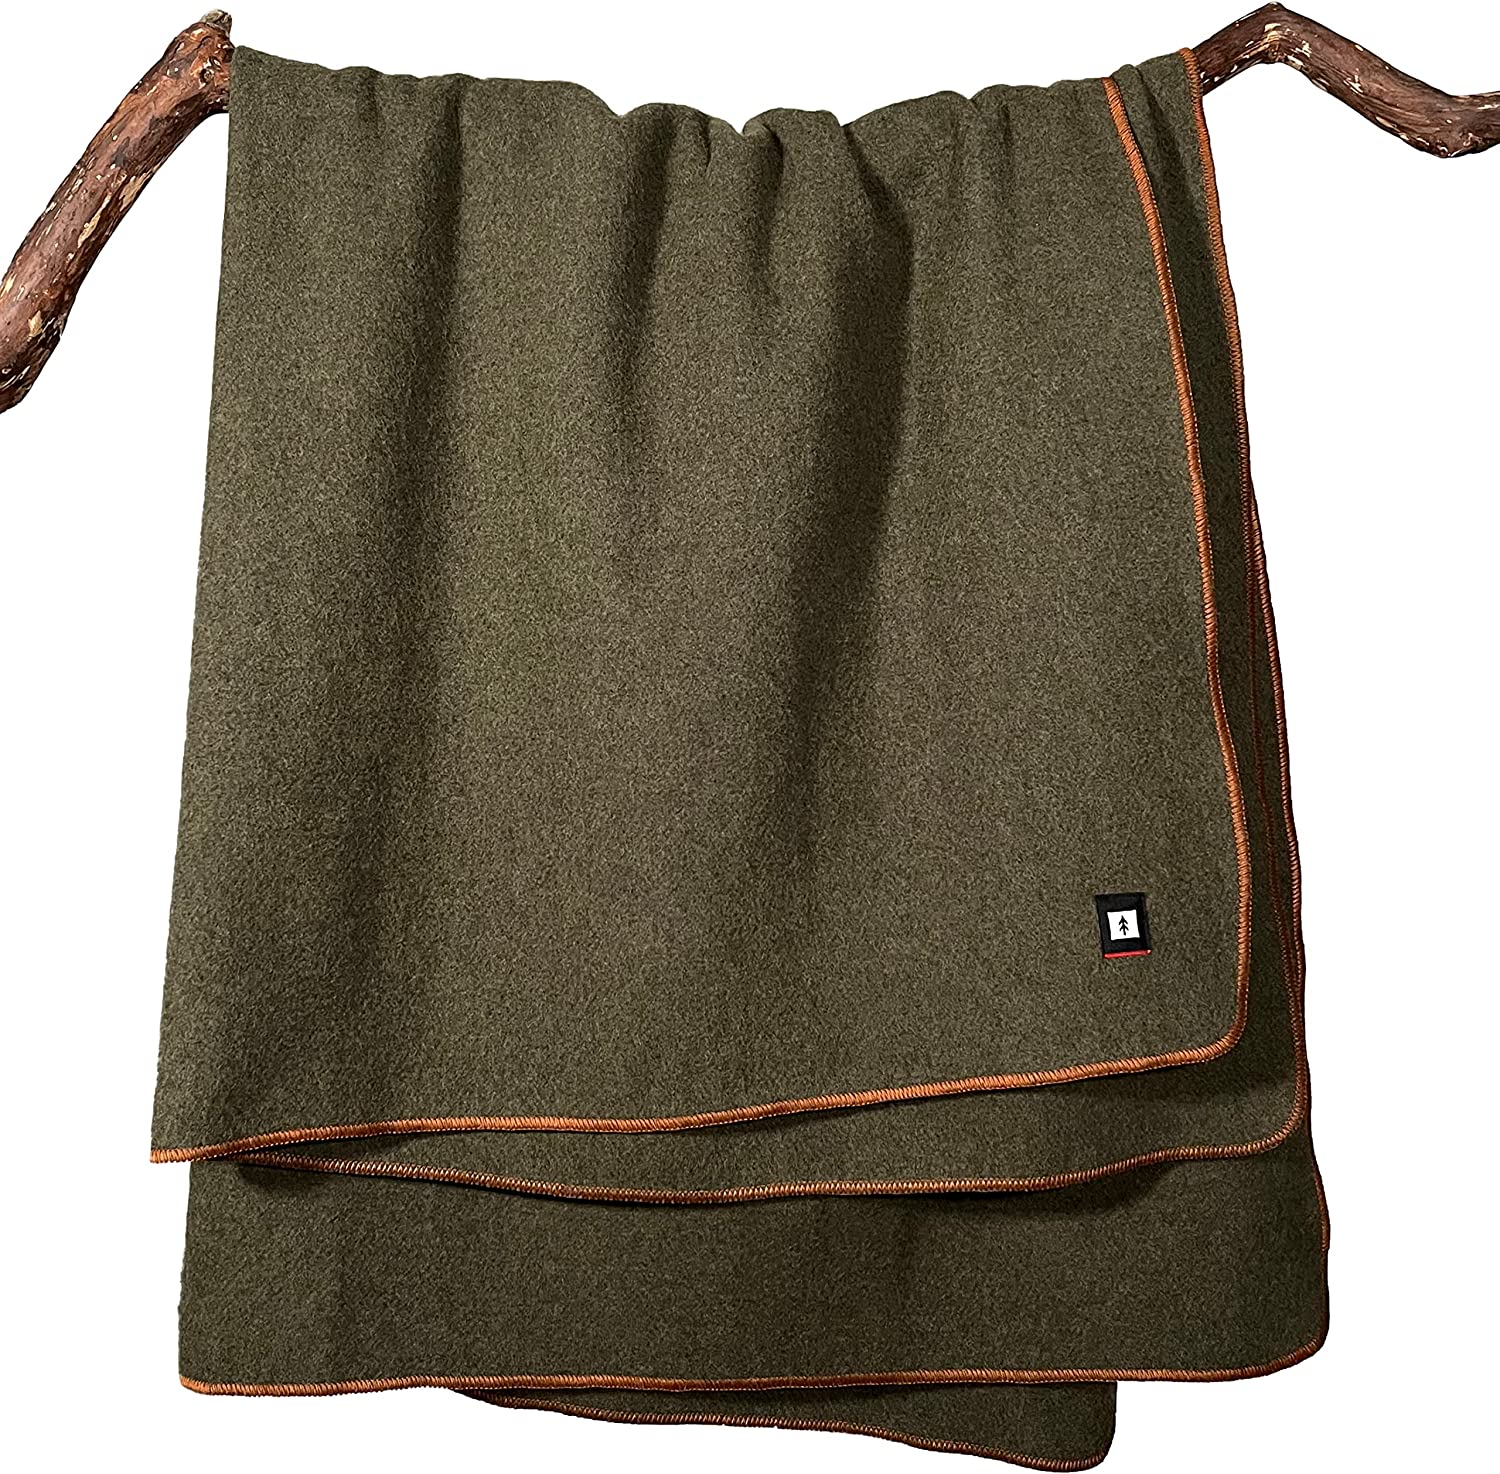 EKTOS 100% Wool Throw Size Blanket, 2.5 lbs, Warm, Thick, Washable, 50" x 60" | Perfect for Home, Cabin, RV, Camping, Outdoor Adventures & Sporting Events (Olive Green)